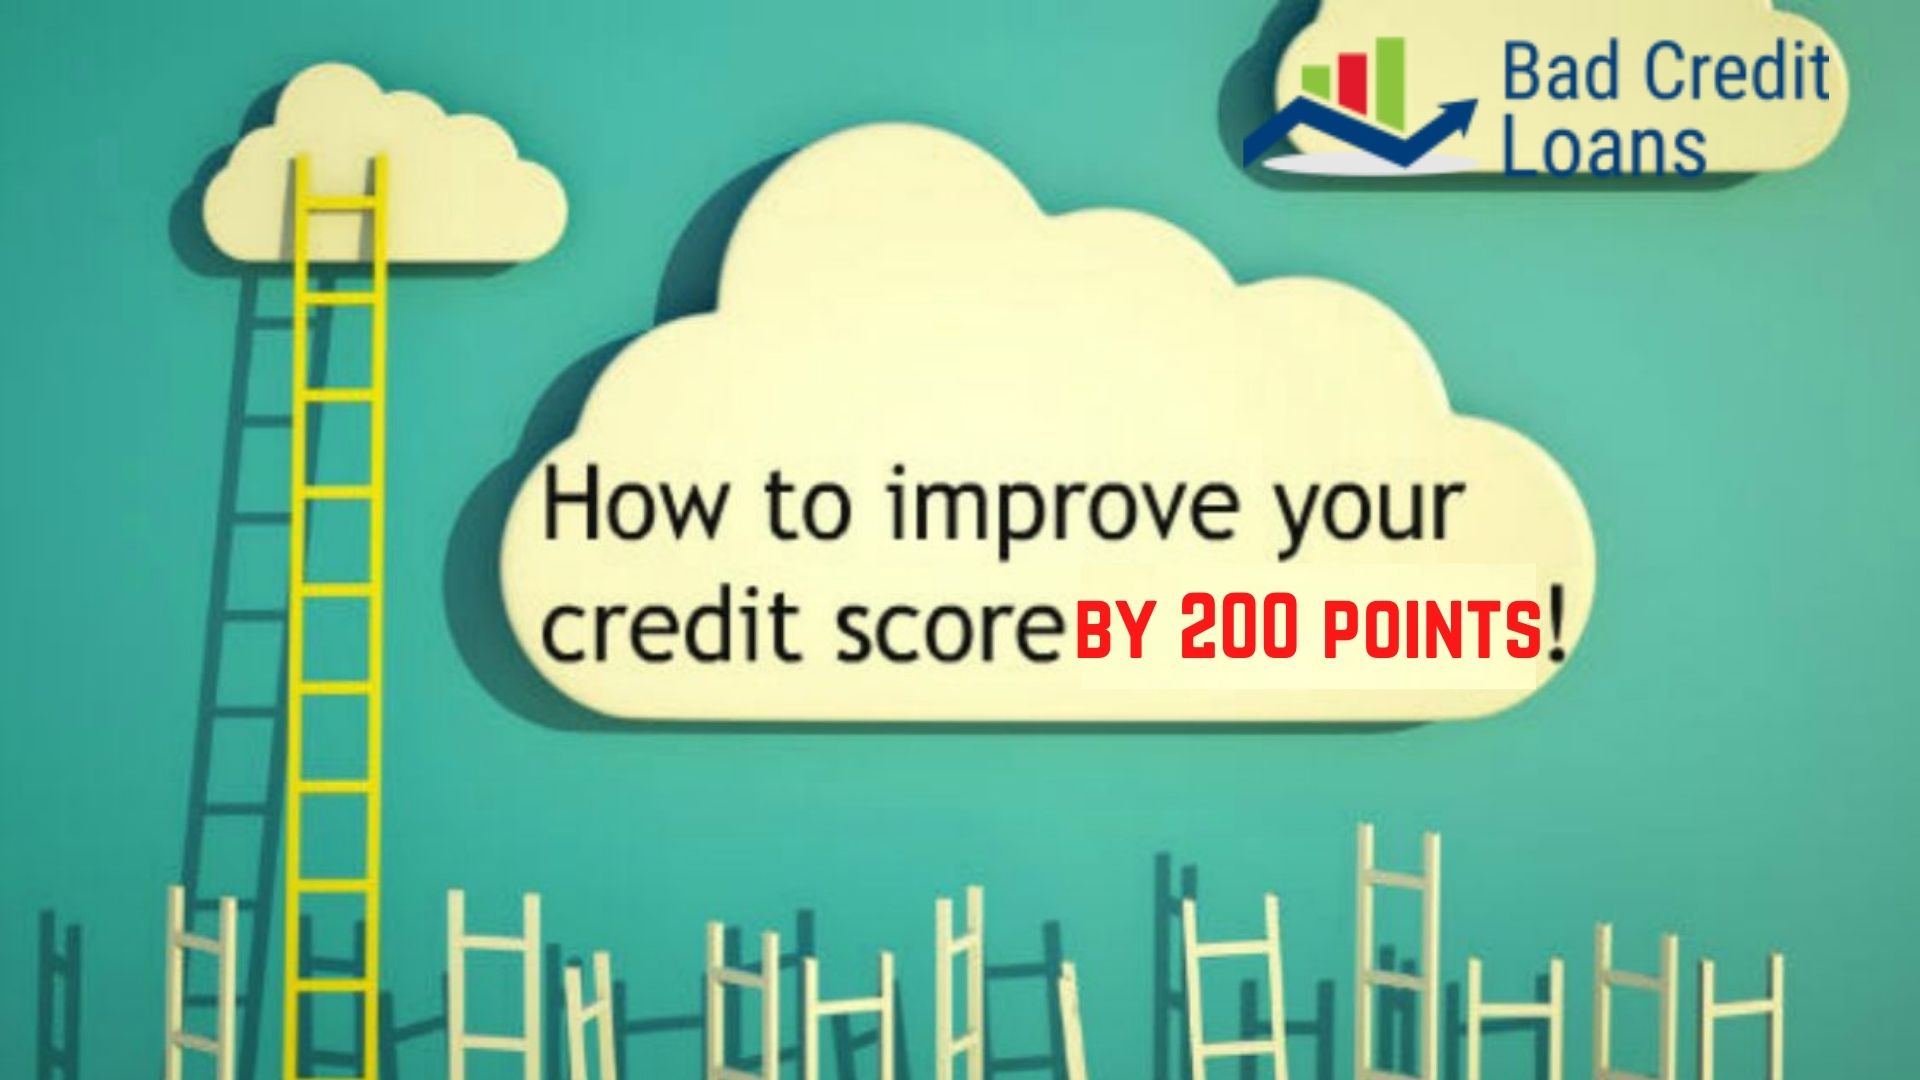 How to increase credit score by 200 points